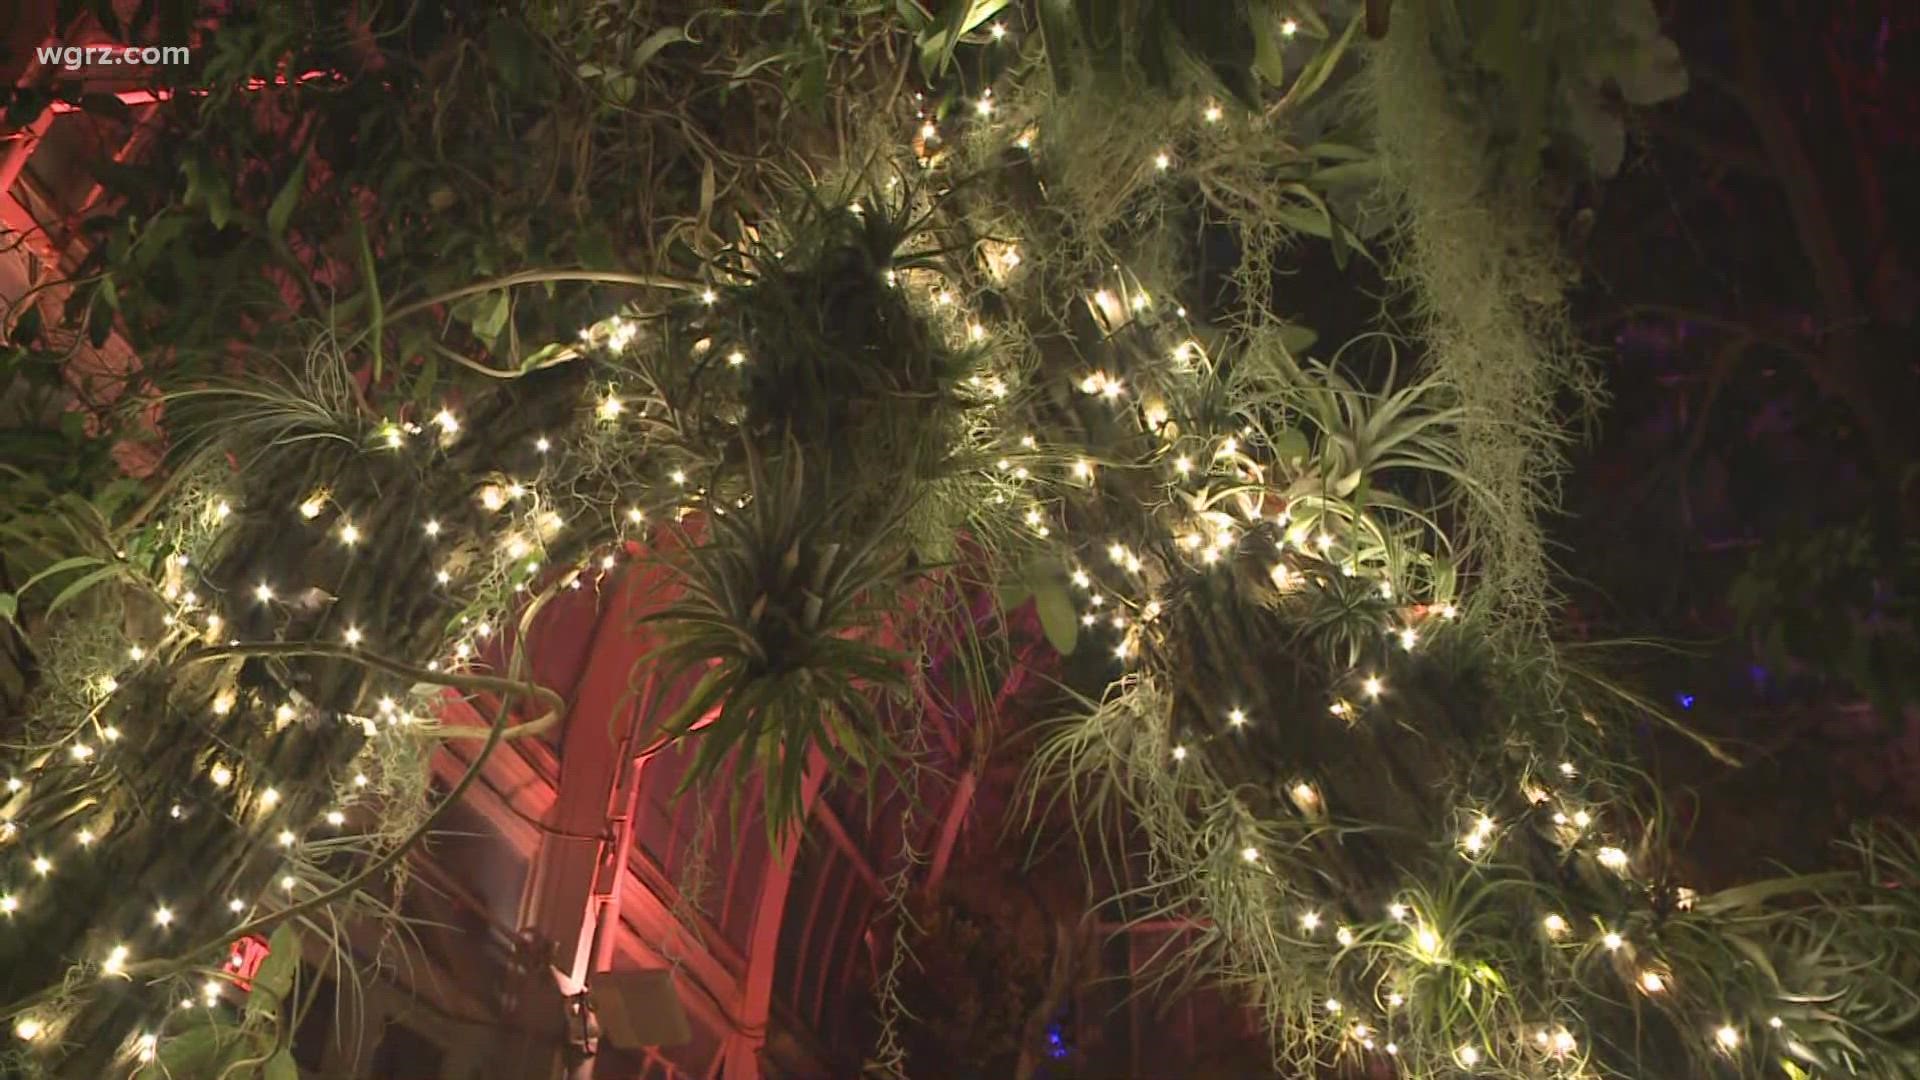 Thousands of exotic plants will be illuminated for this special exhibit throughout the month of October.